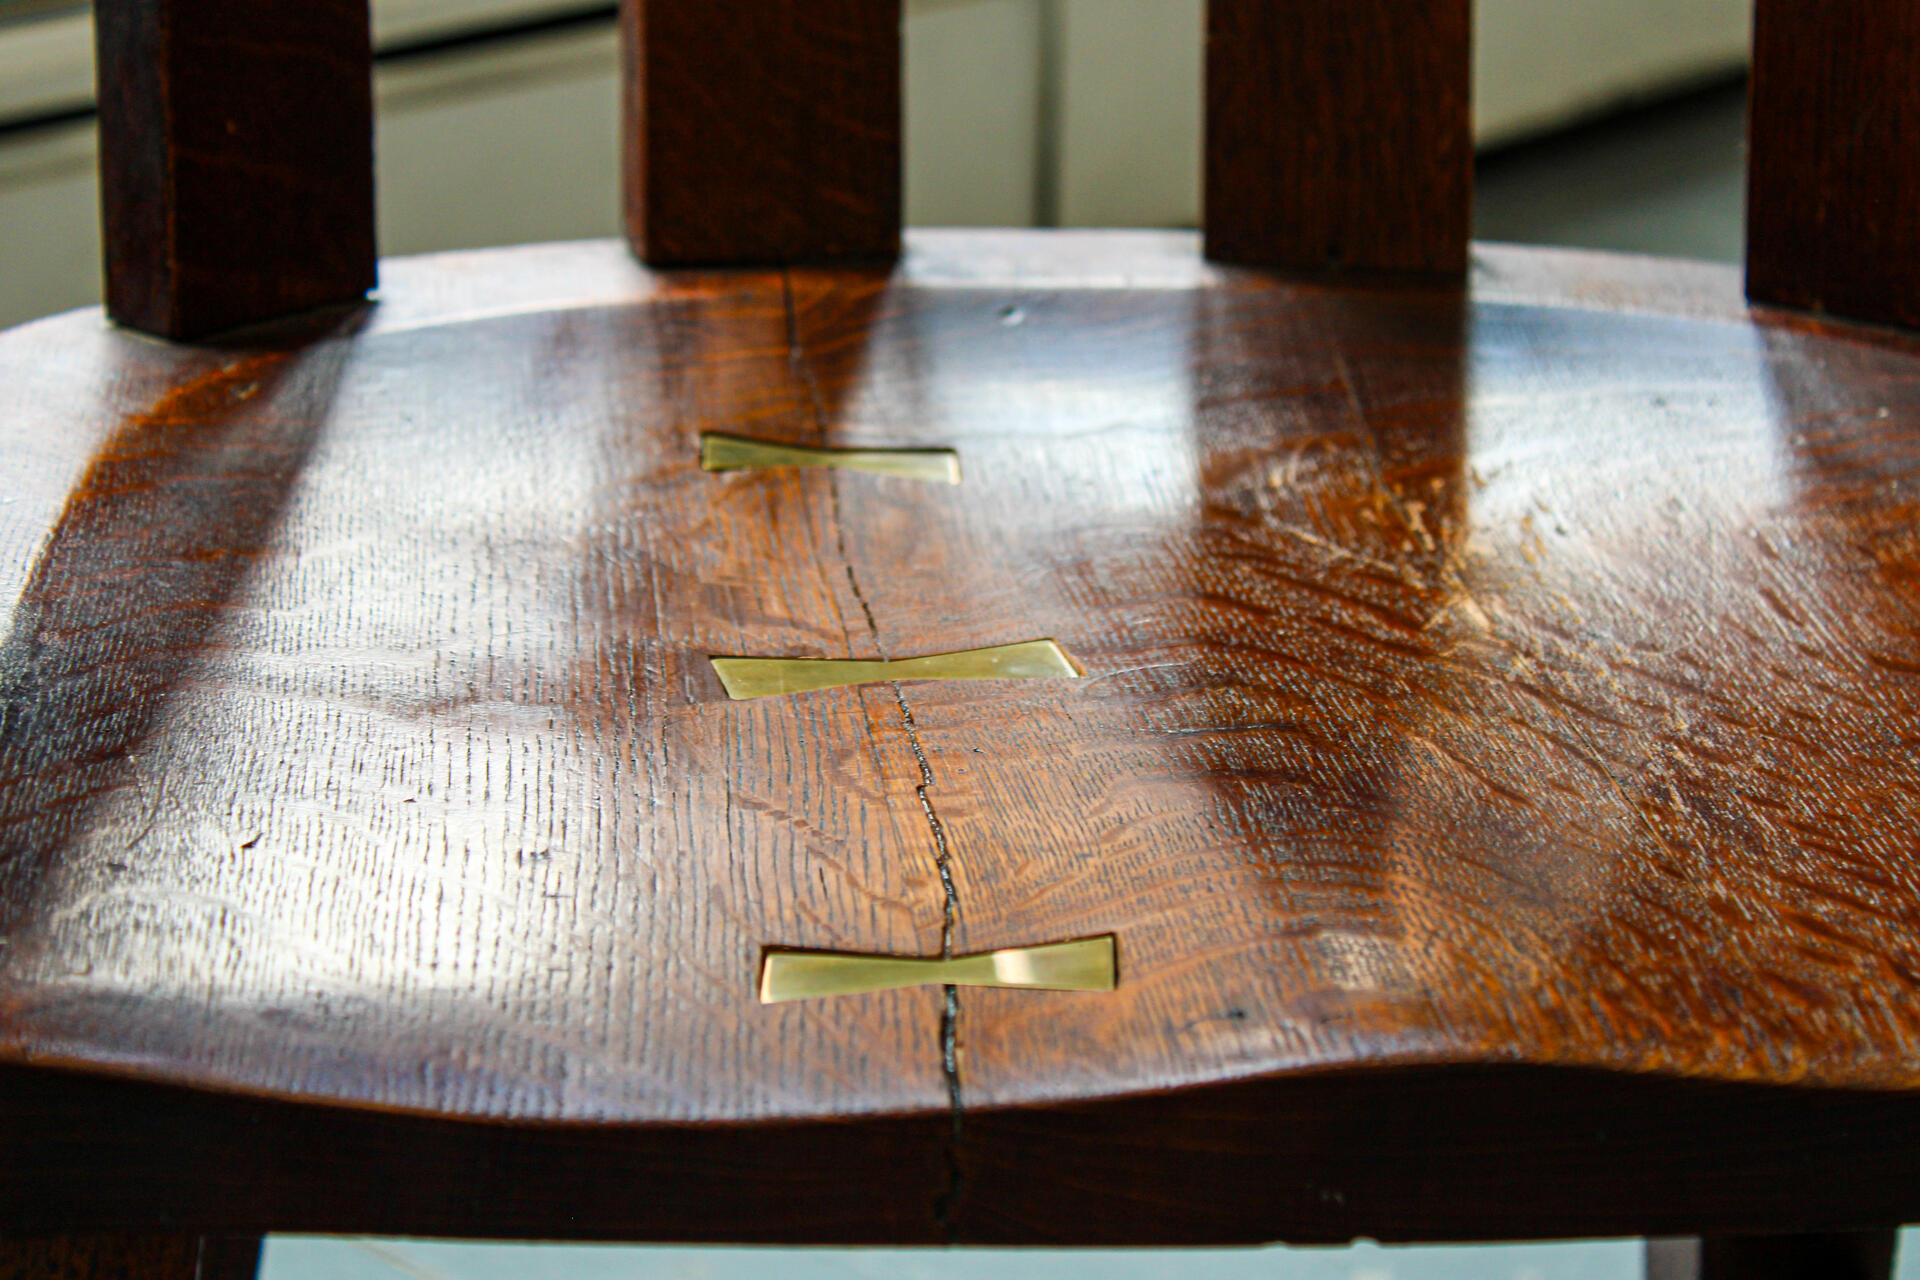 A close up shot of the repaired oak chair highlighting the brass bowties holding together the formerly cracked seat of the chair.